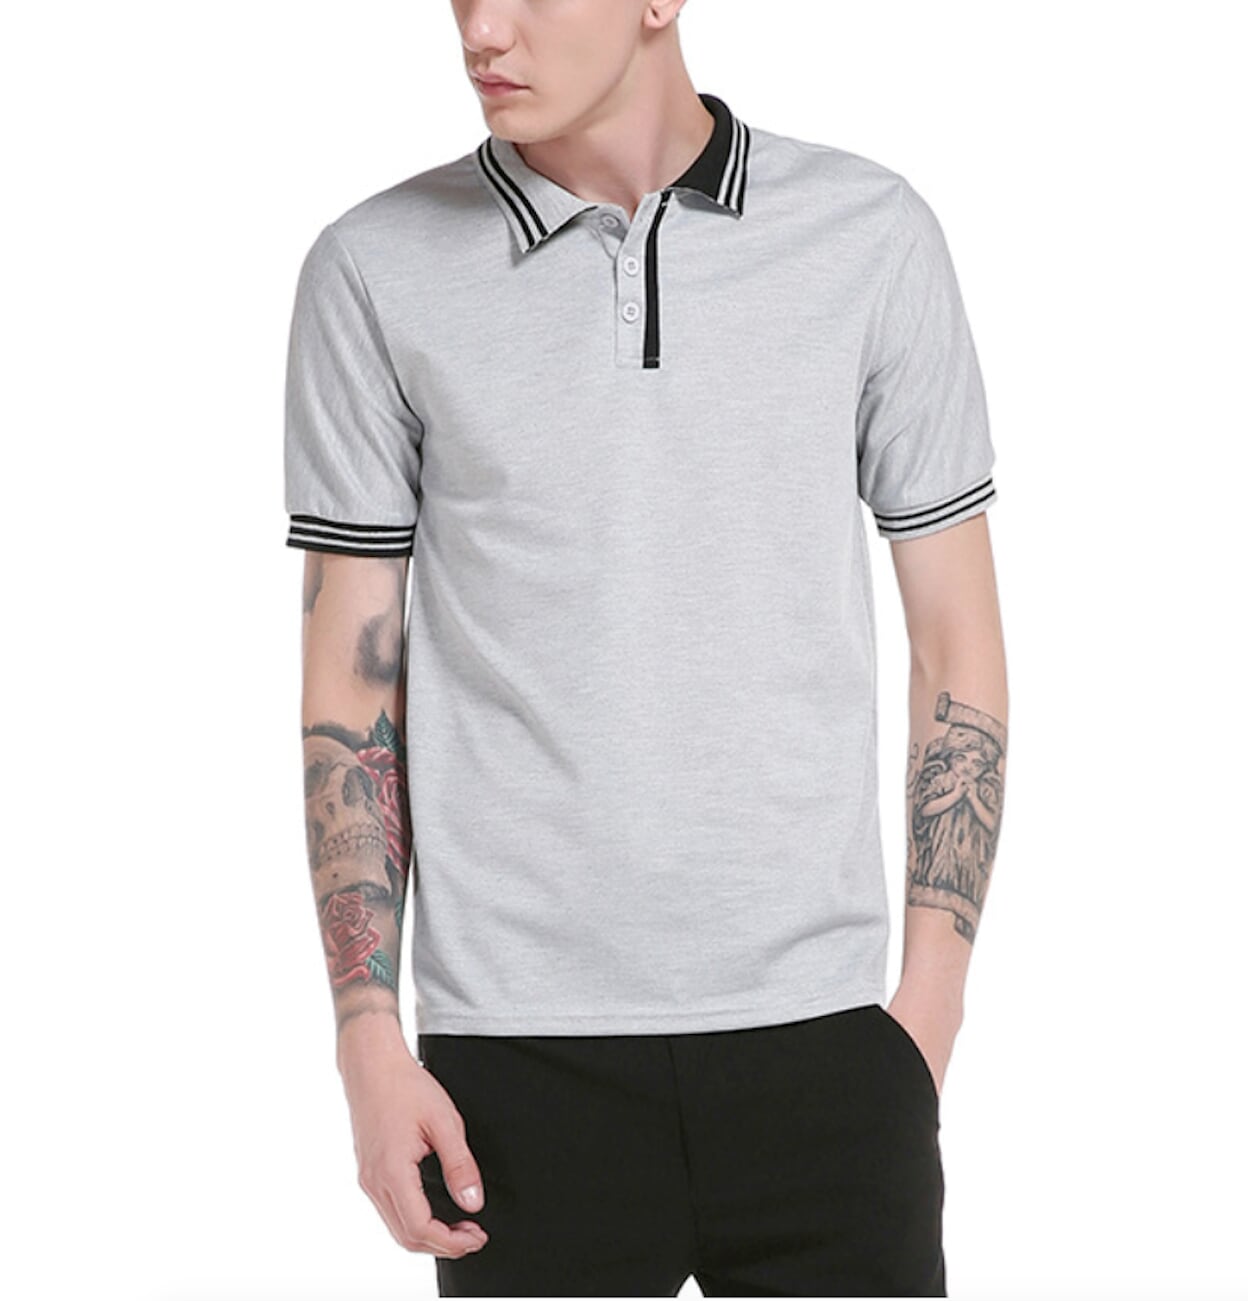 Mens Short Sleeve Polo Shirt with Contrasting Details